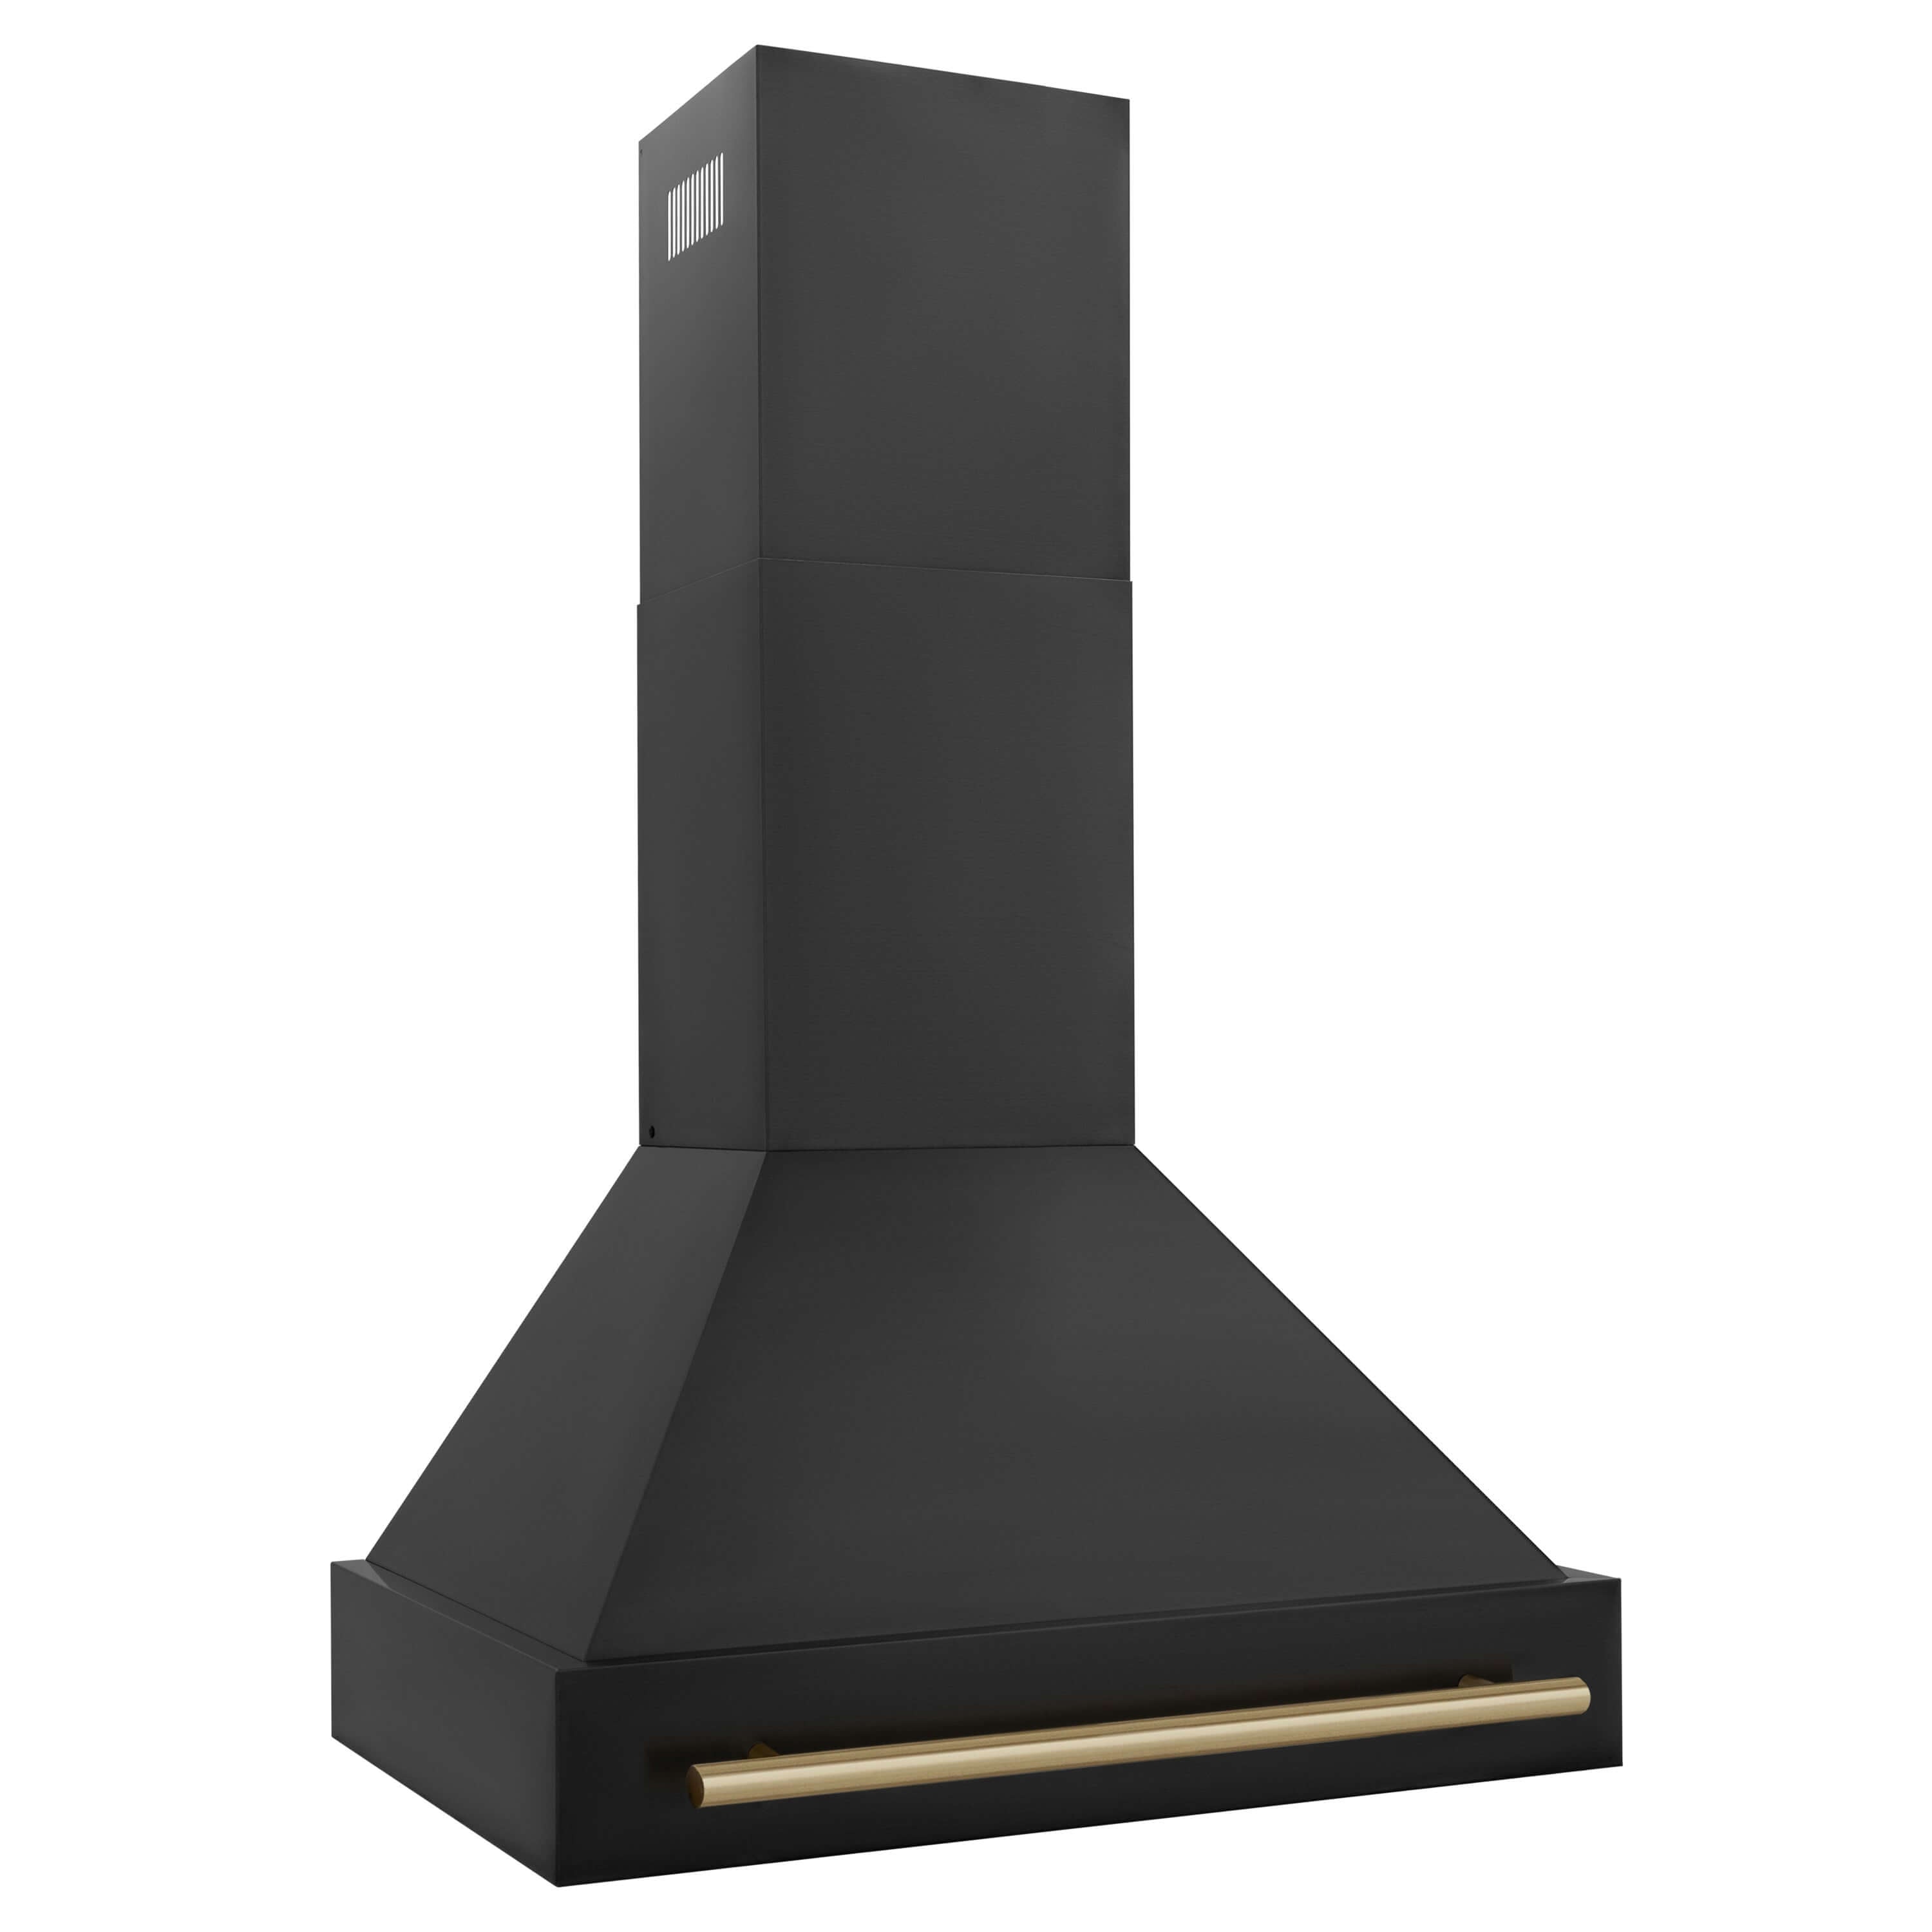 ZLINE Autograph Edition 30 in. Black Stainless Steel Range Hood with Accent Handle (BS655Z-30) Champagne Bronze side.